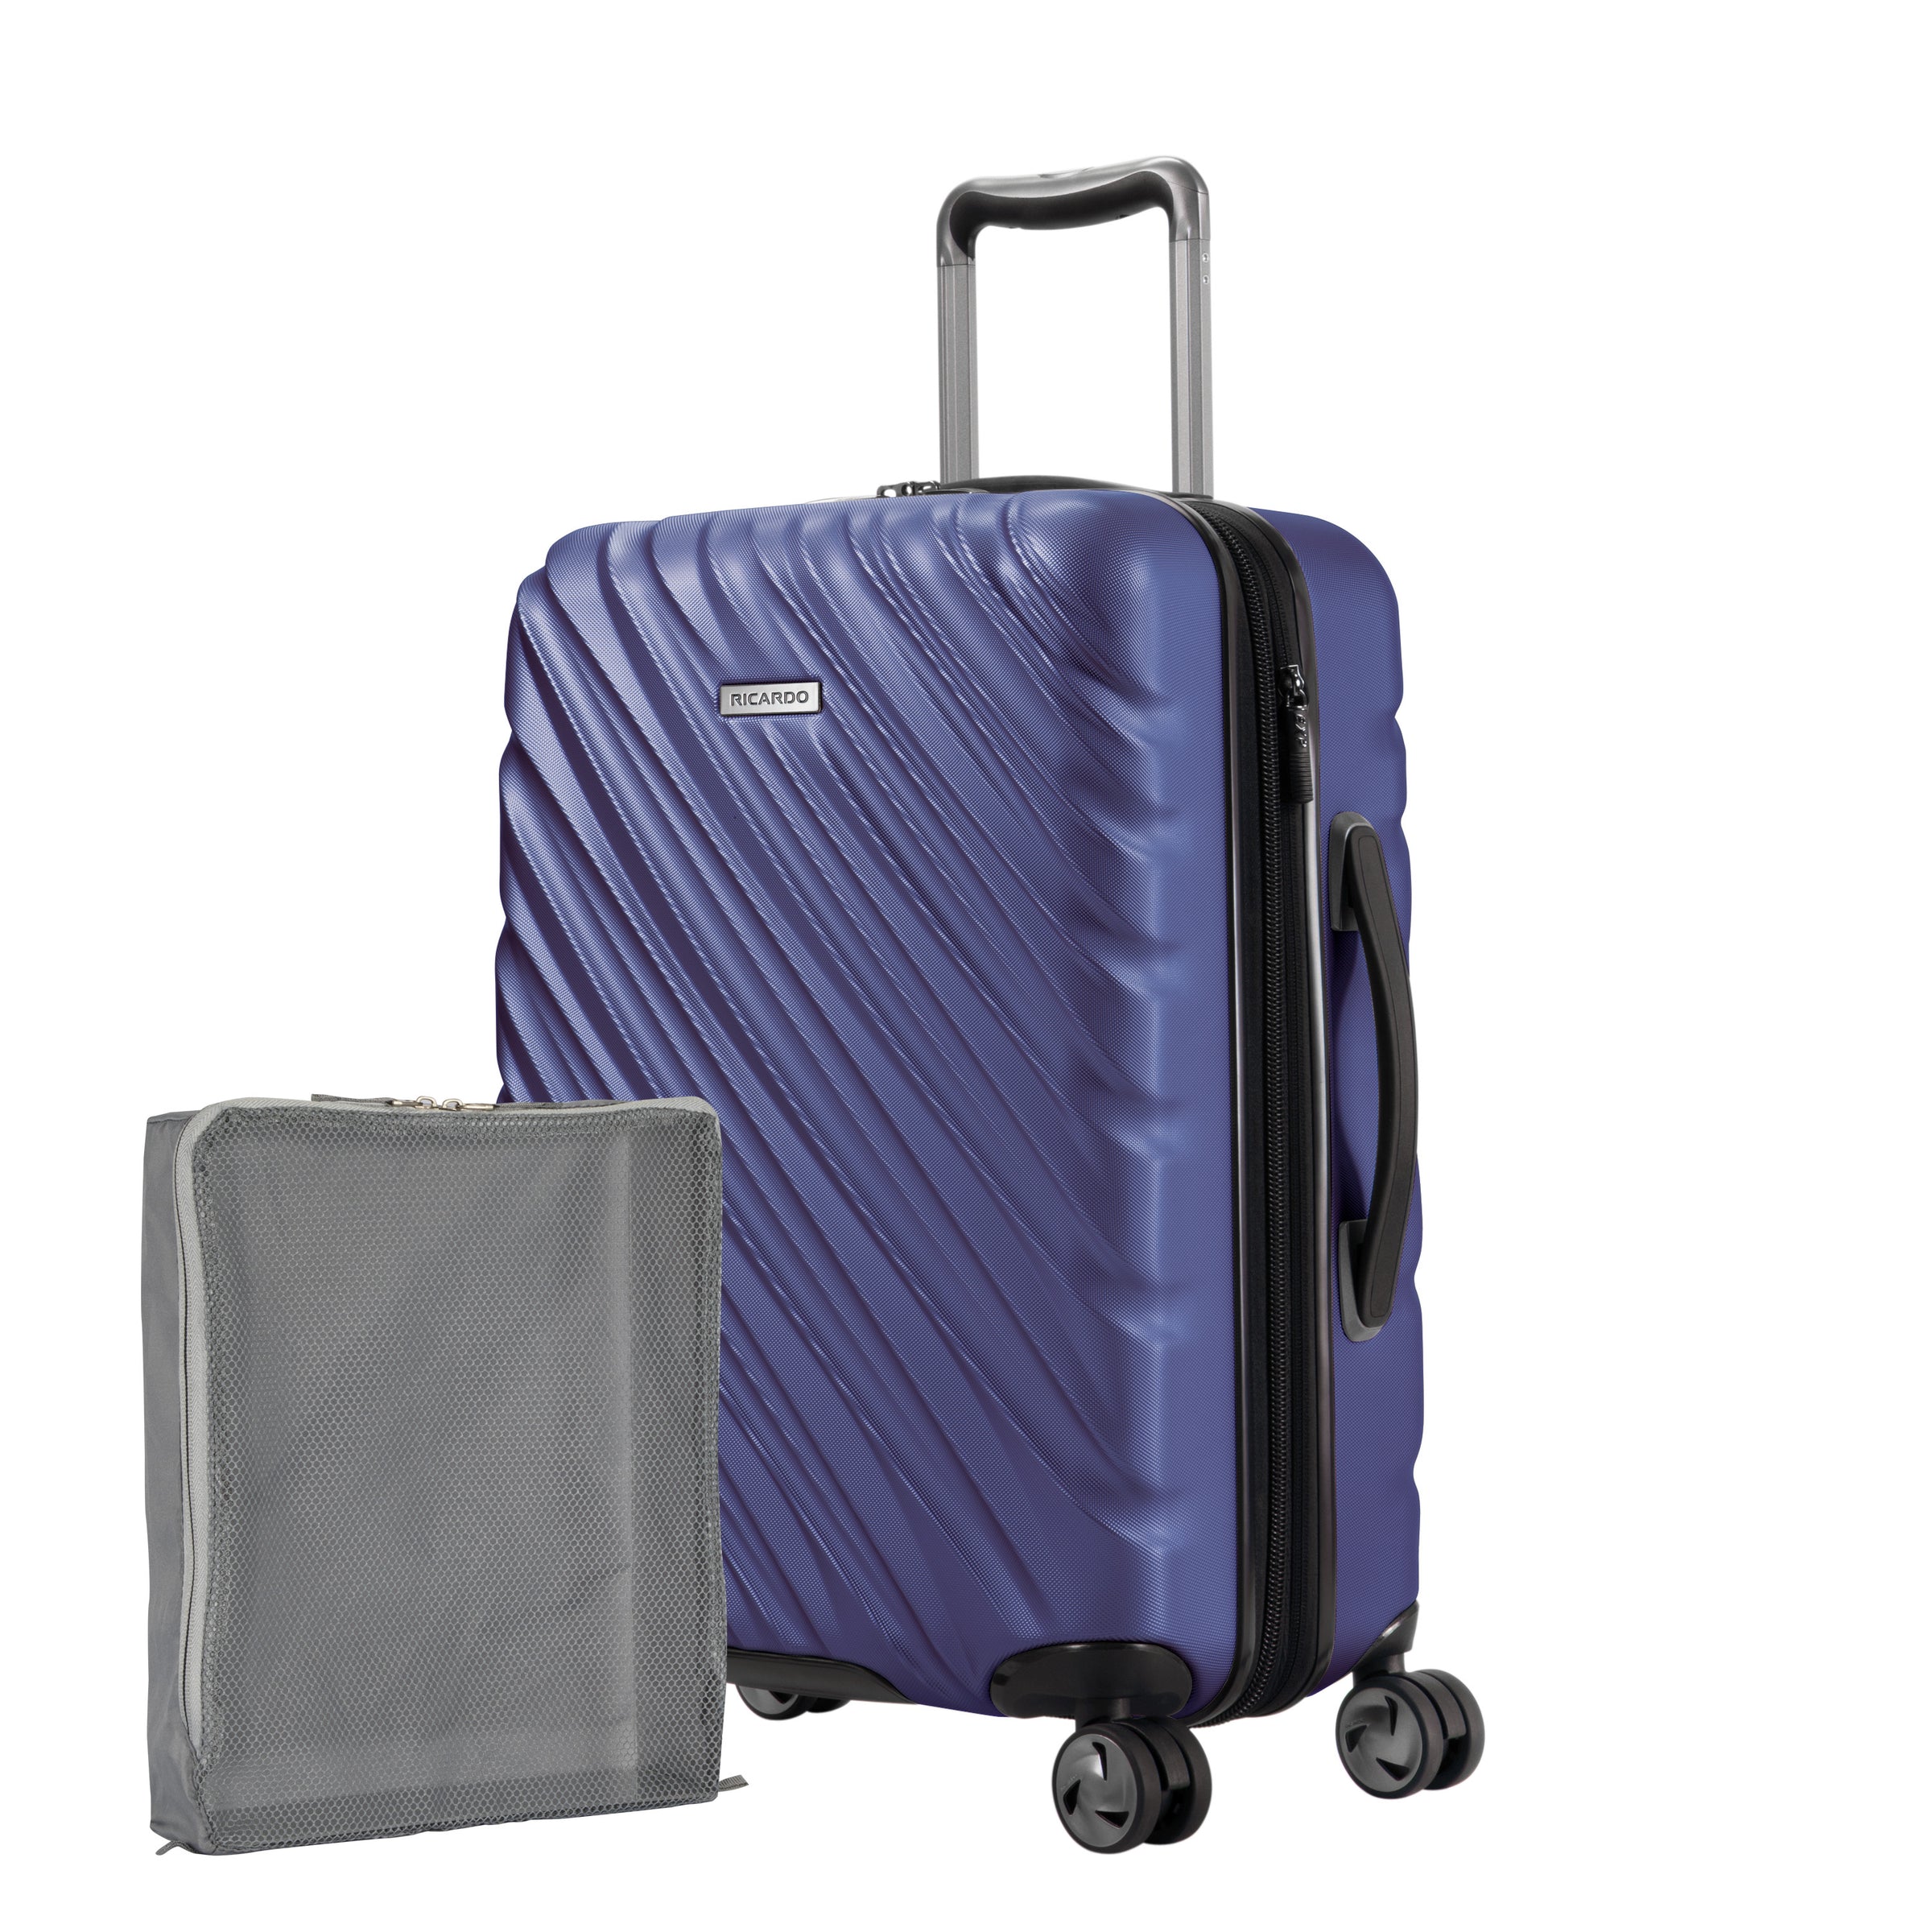 Maritime blue Ricardo Mojave carry-on hardside suitcase with diagonal grooves shown with a large grey packing cube